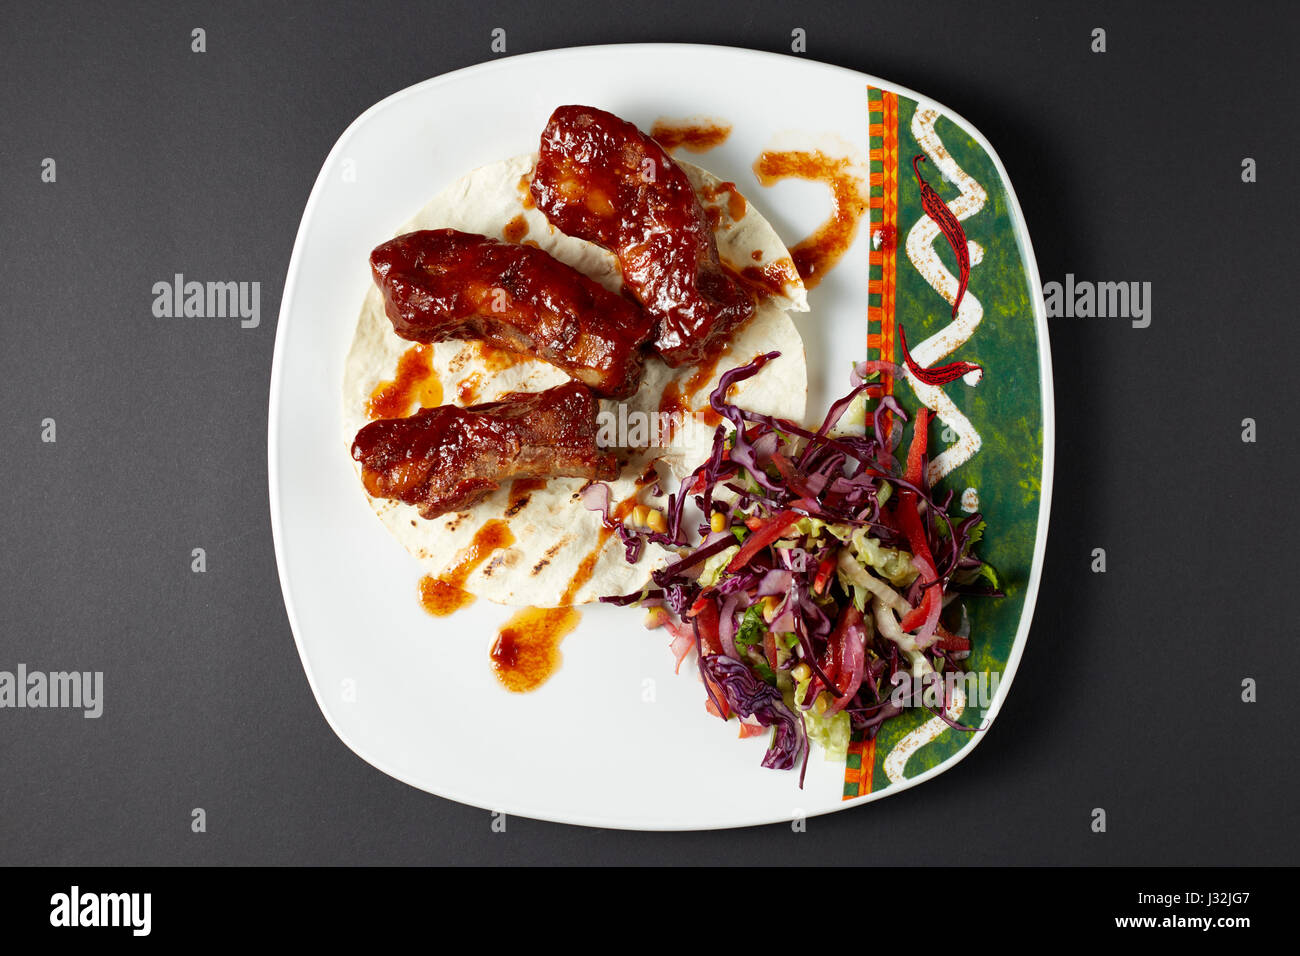 Pork ribs in Mexican style. Mexican food. Mexican cuisine. Studio shot on dark or black background. Stock Photo